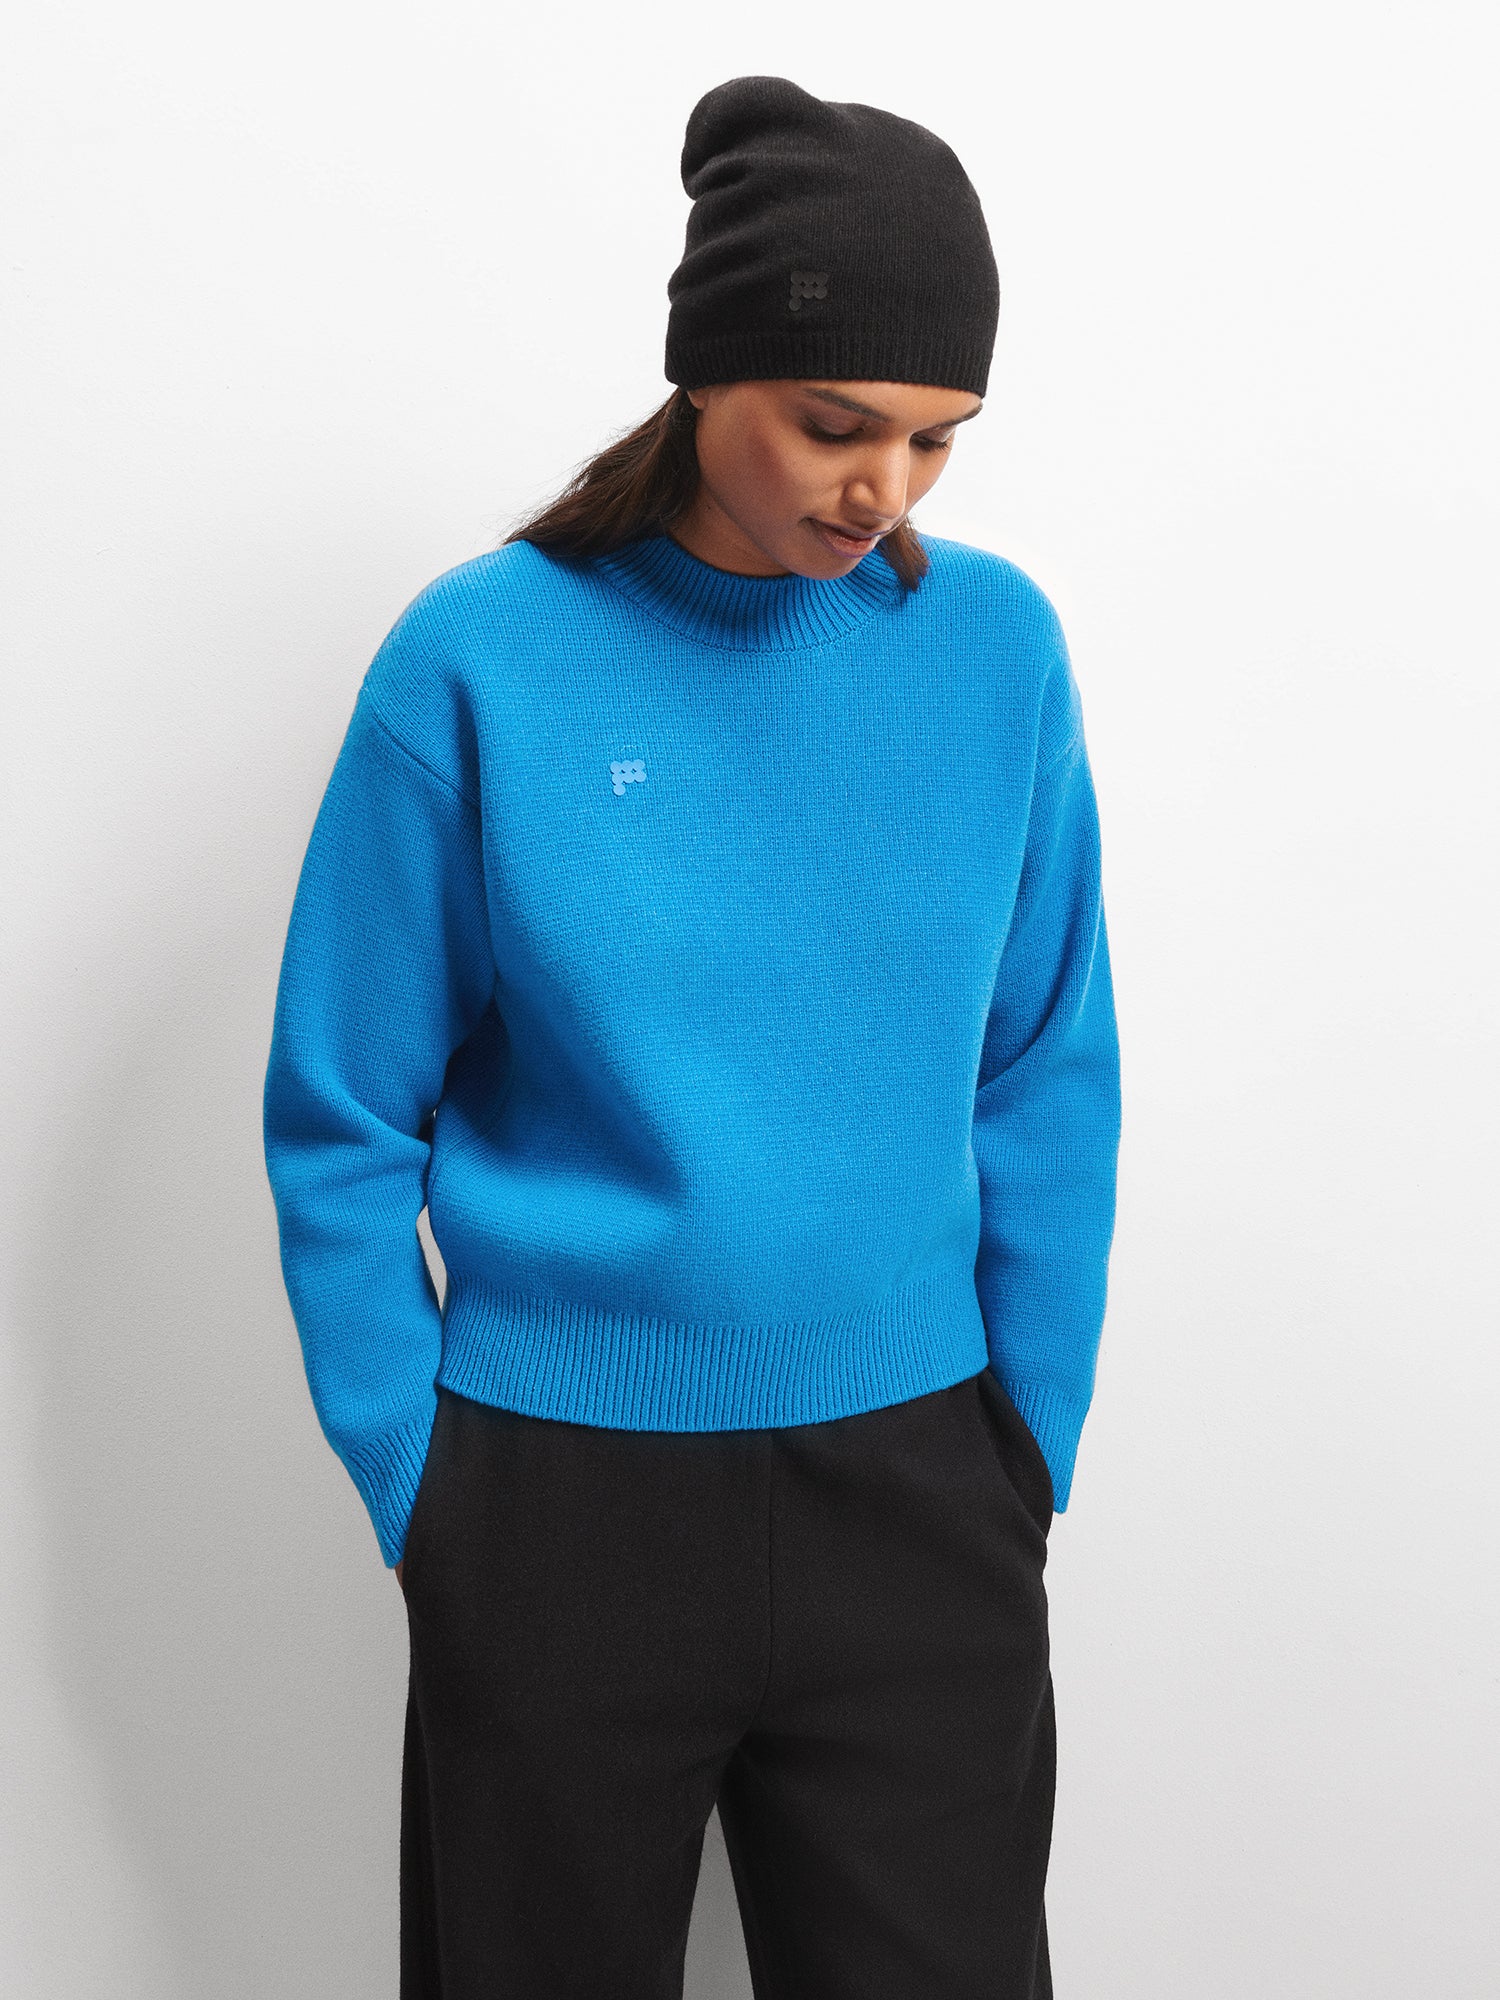 Recycled_Cashmere_Knit_Crew_NeckSweater_Cerulean_Blue-female-1